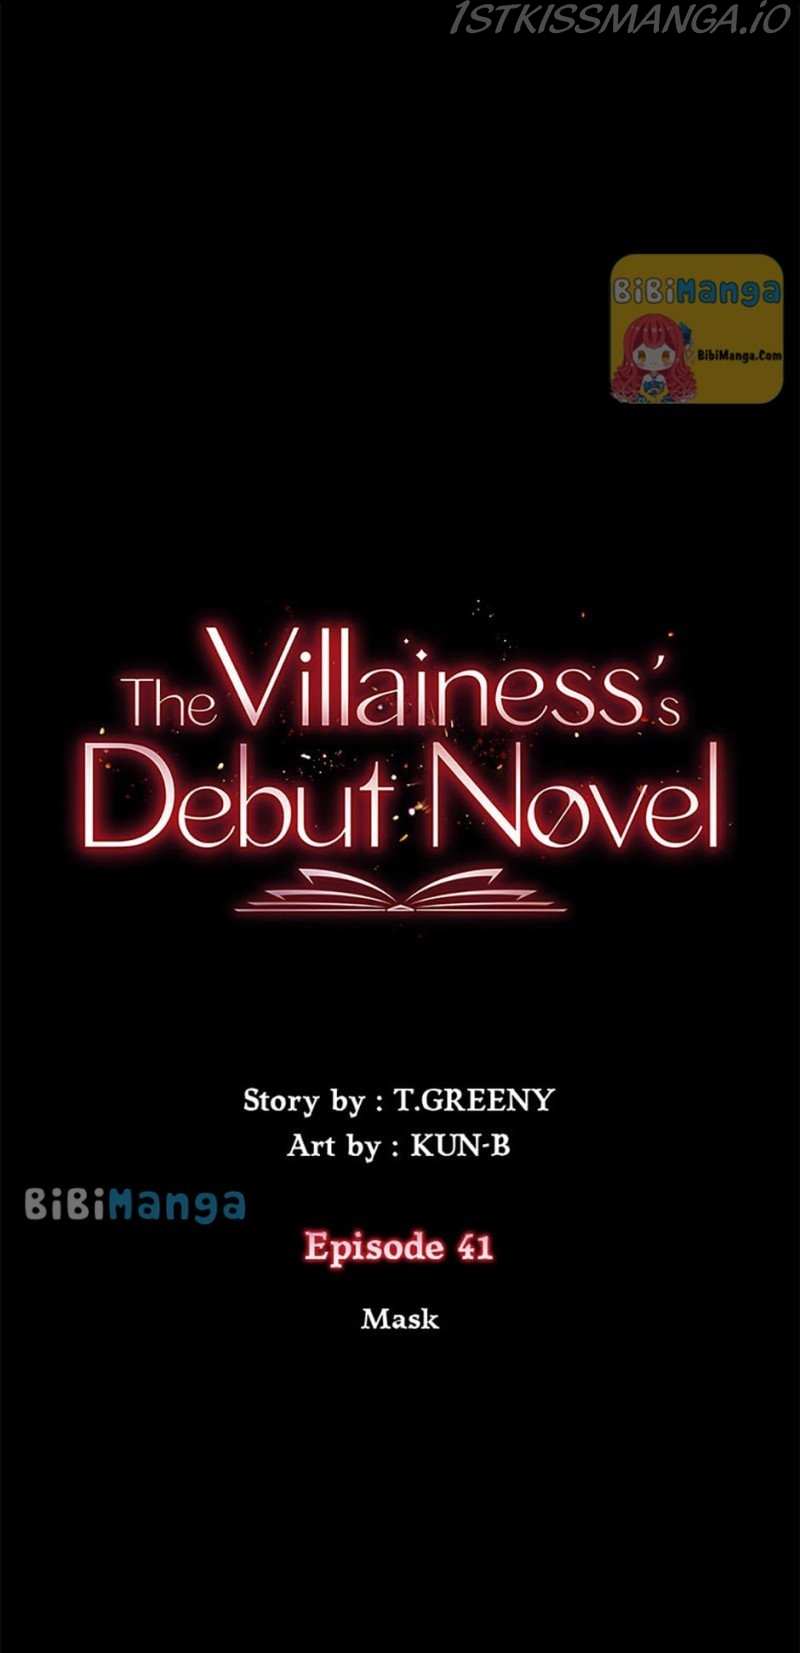 The Villainess’s Debut chapter 41